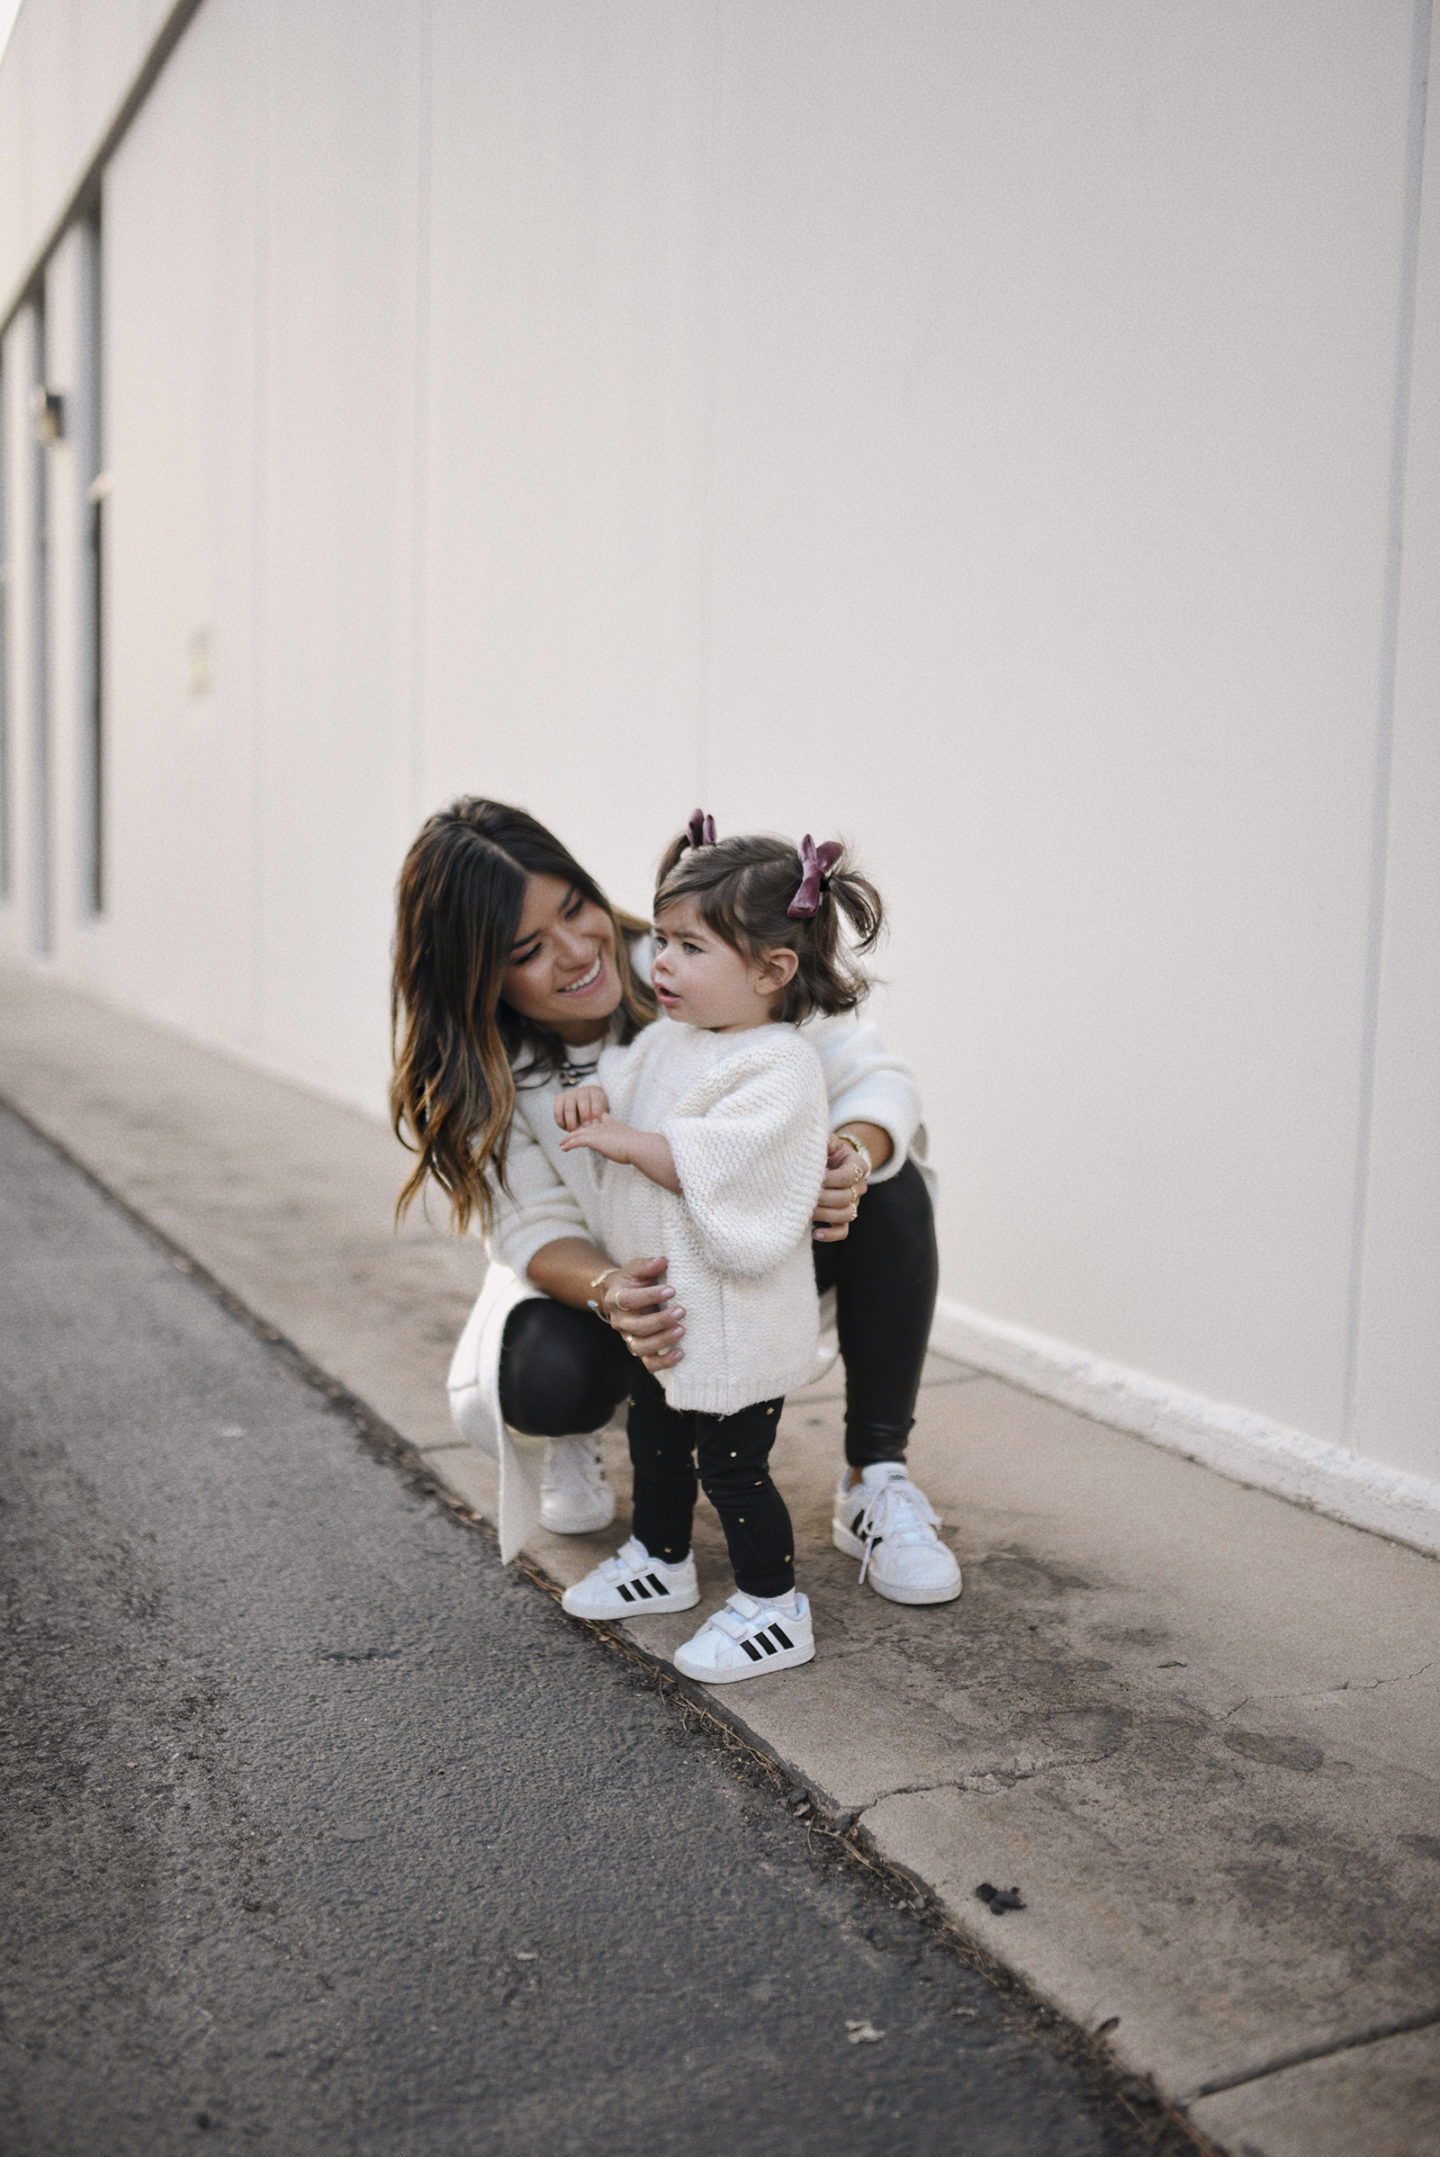 matching mom and daughter adidas outfits